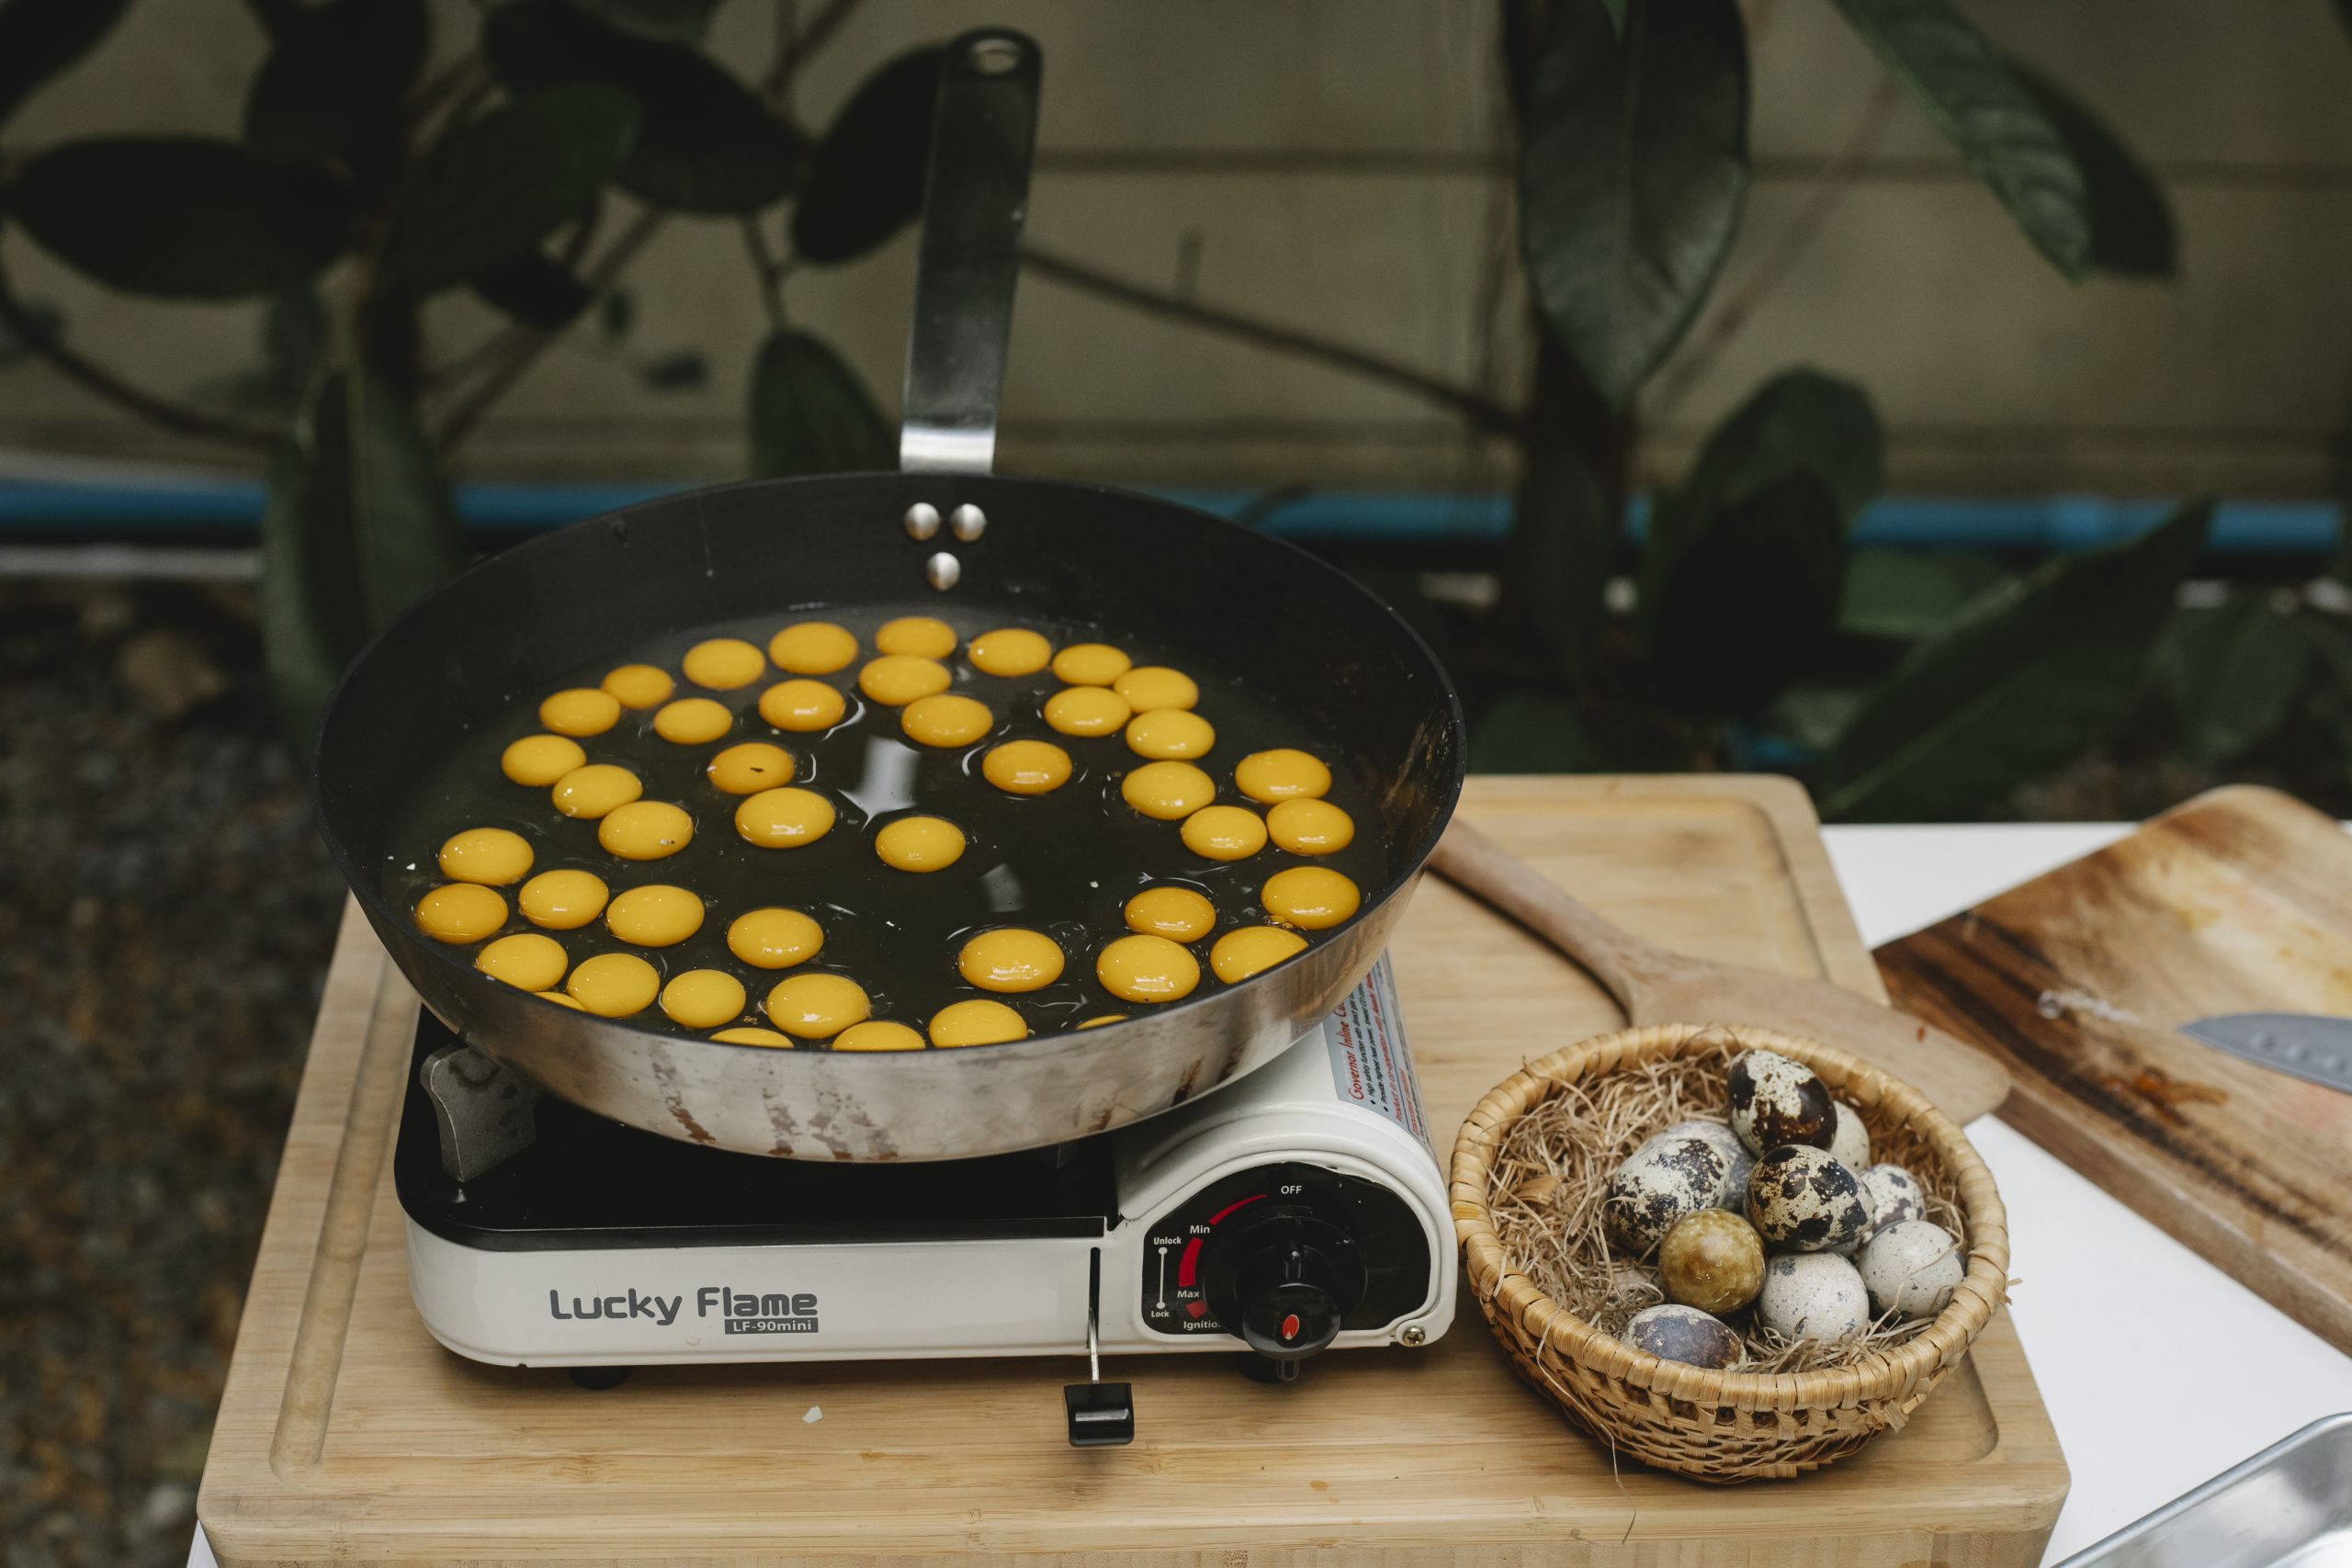 Many quail eggs on electric stove